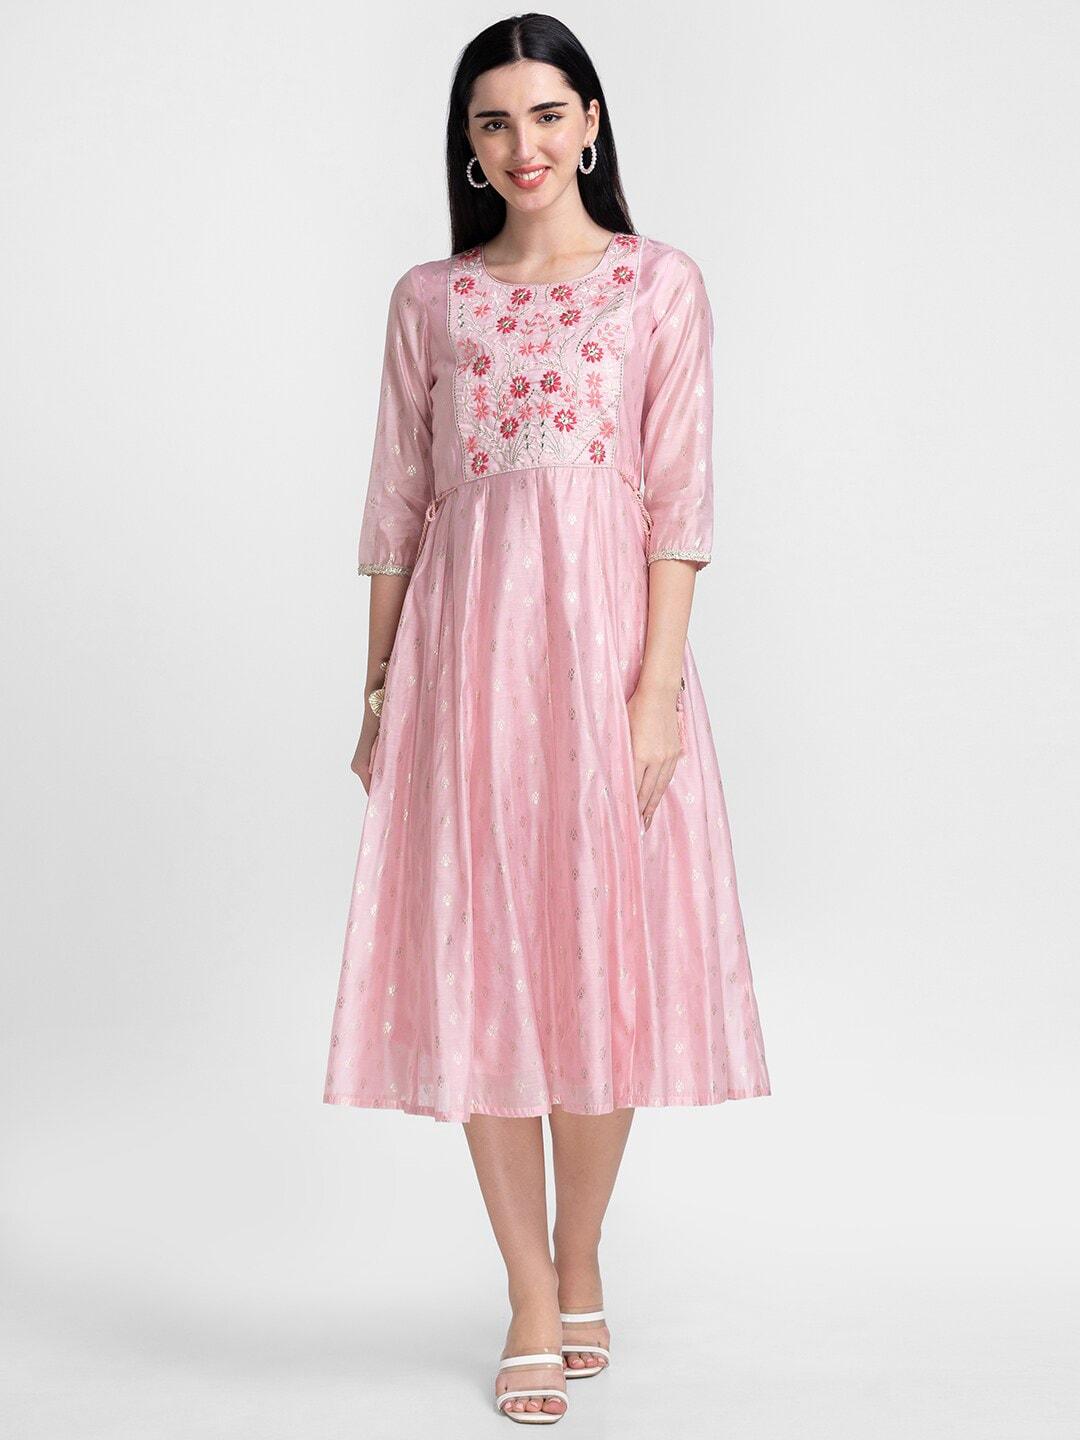 Globus Pink Floral Embroidered Ethnic A-Line Midi Dress